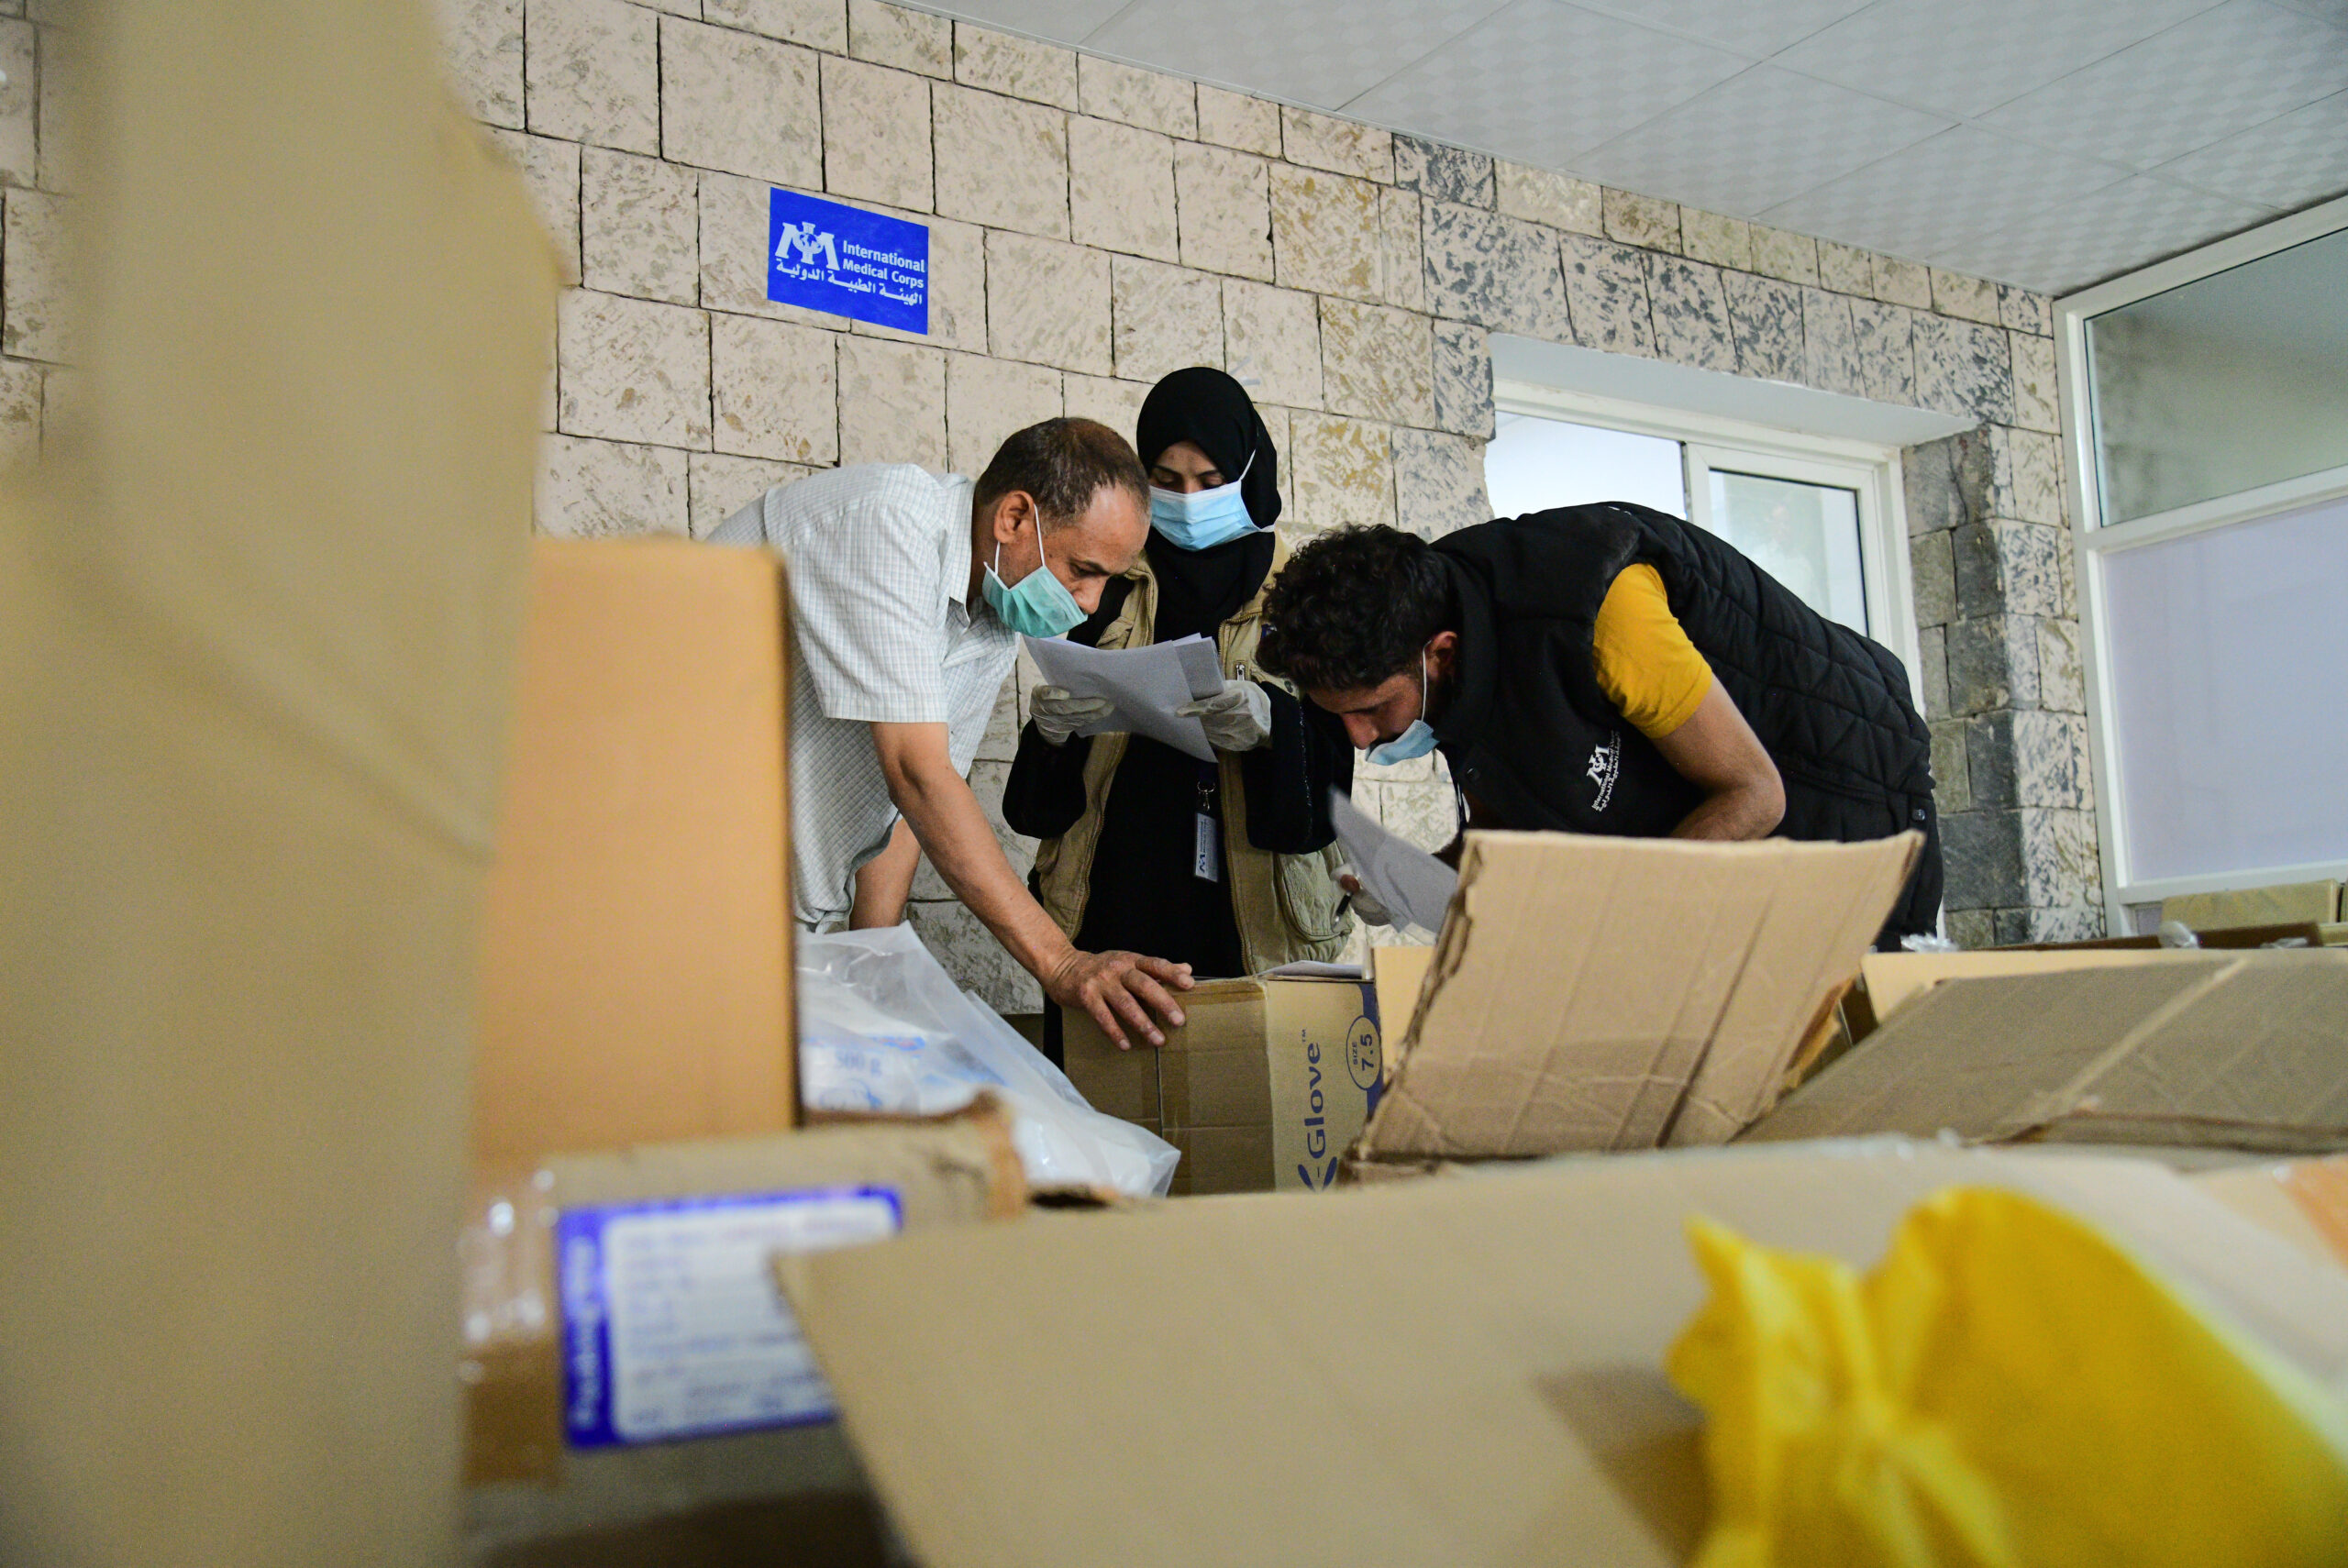 Our team recently delivered medical equipment and furniture to an orphanage in Sana’a city.